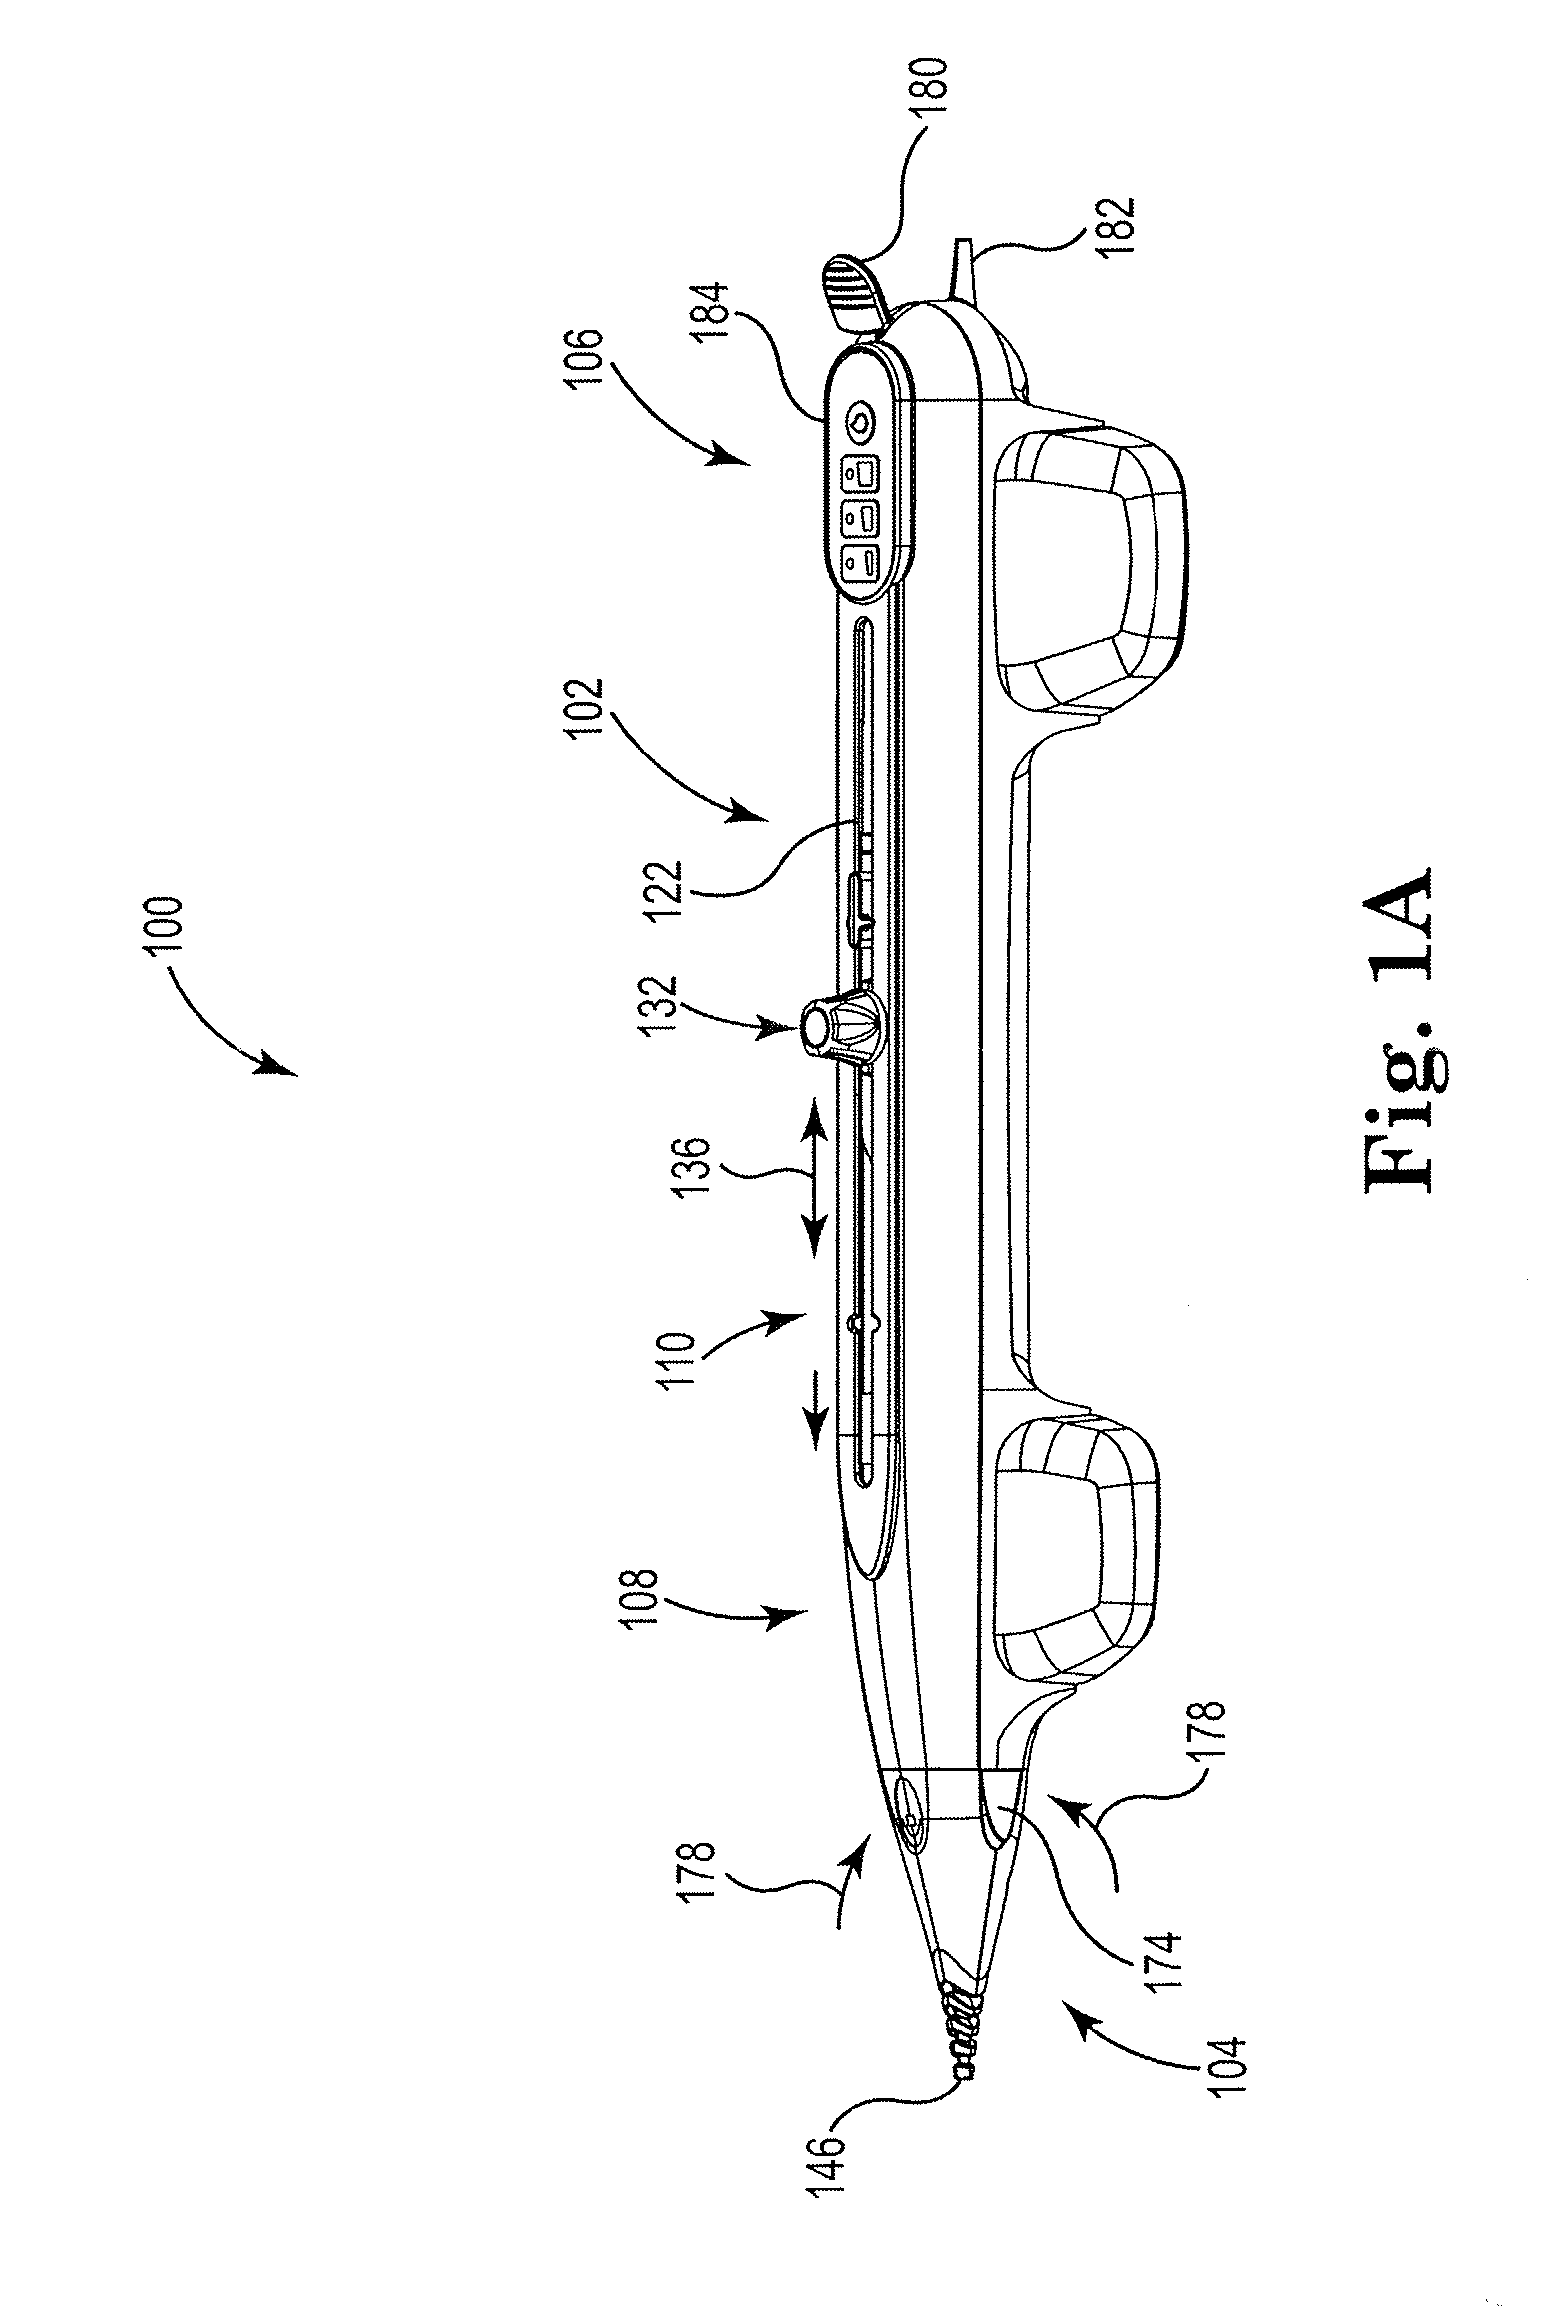 Rotational atherectomy device with exchangeable drive shaft and meshing gears